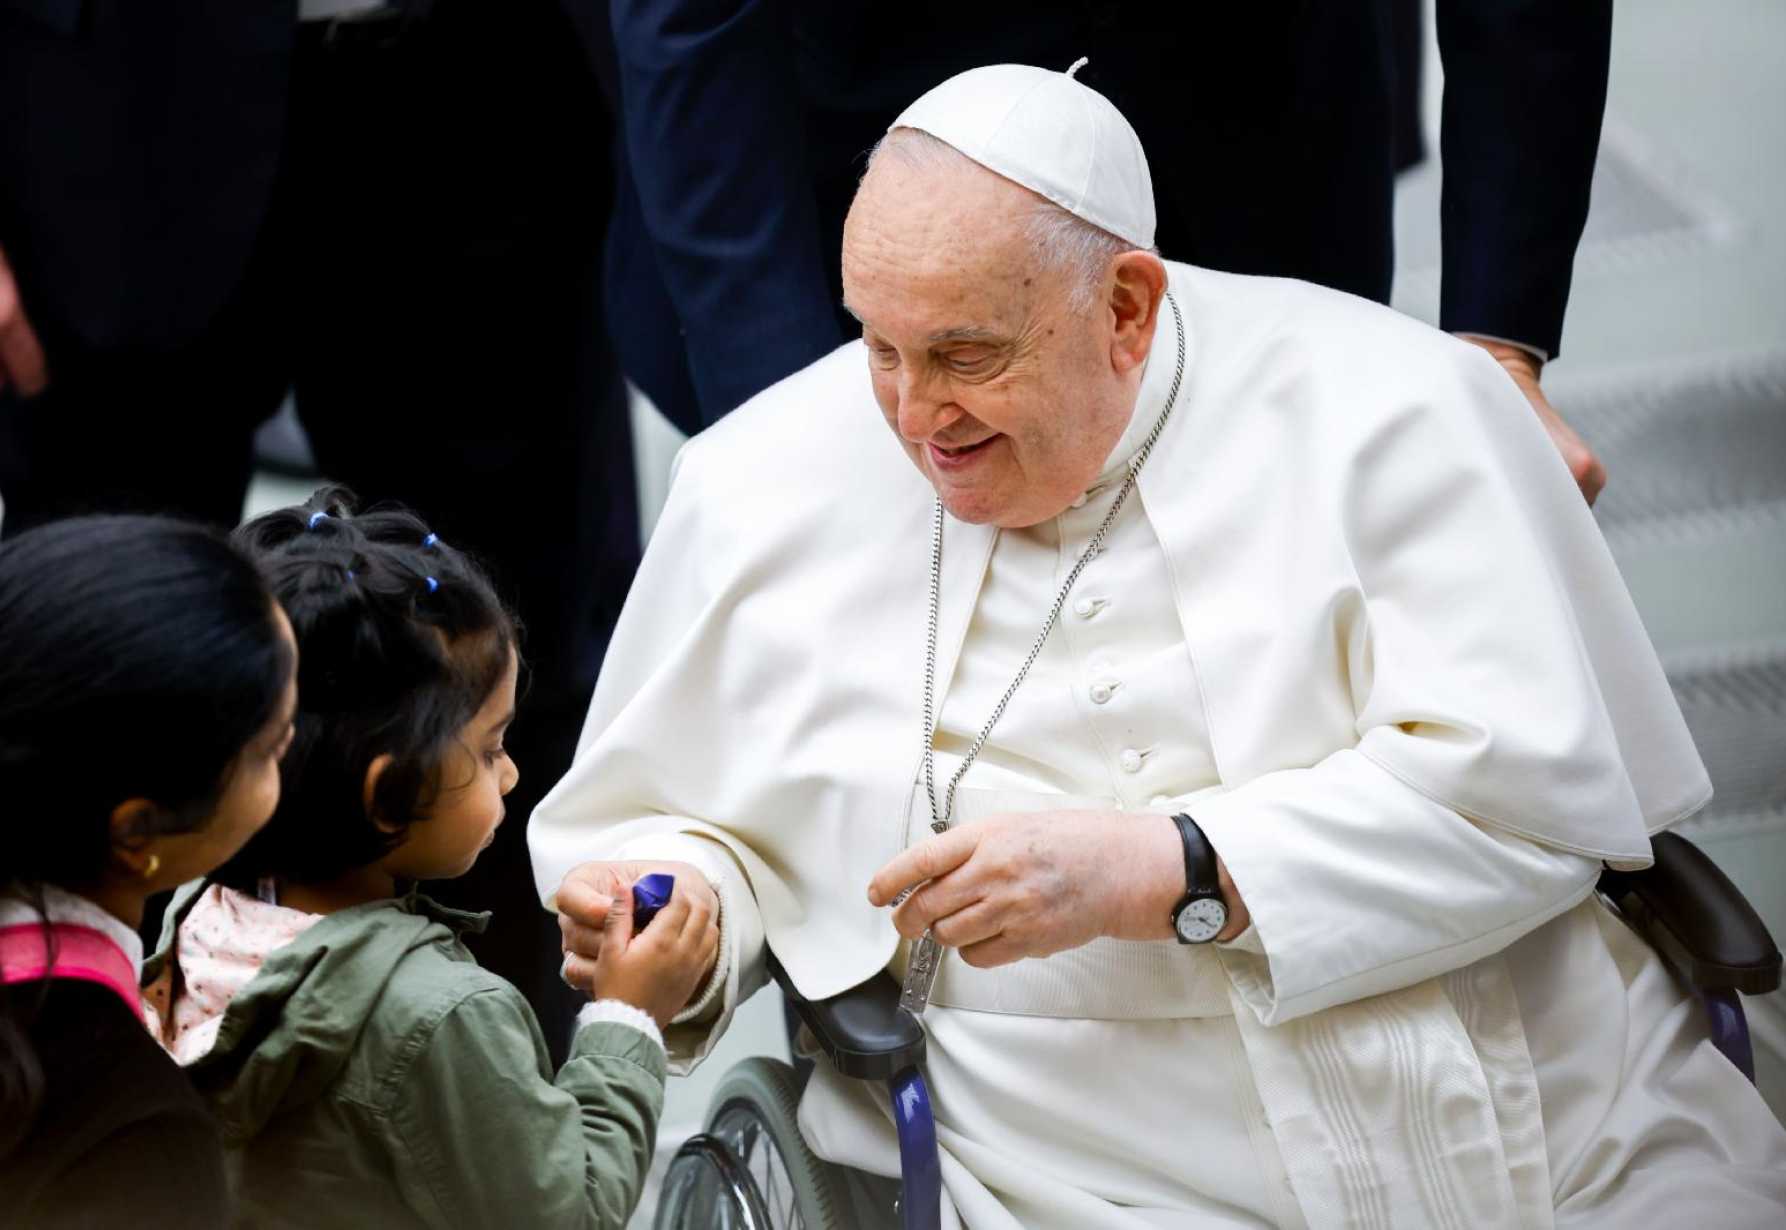 Be generous with others; greed is a sickness, pope says at audience  